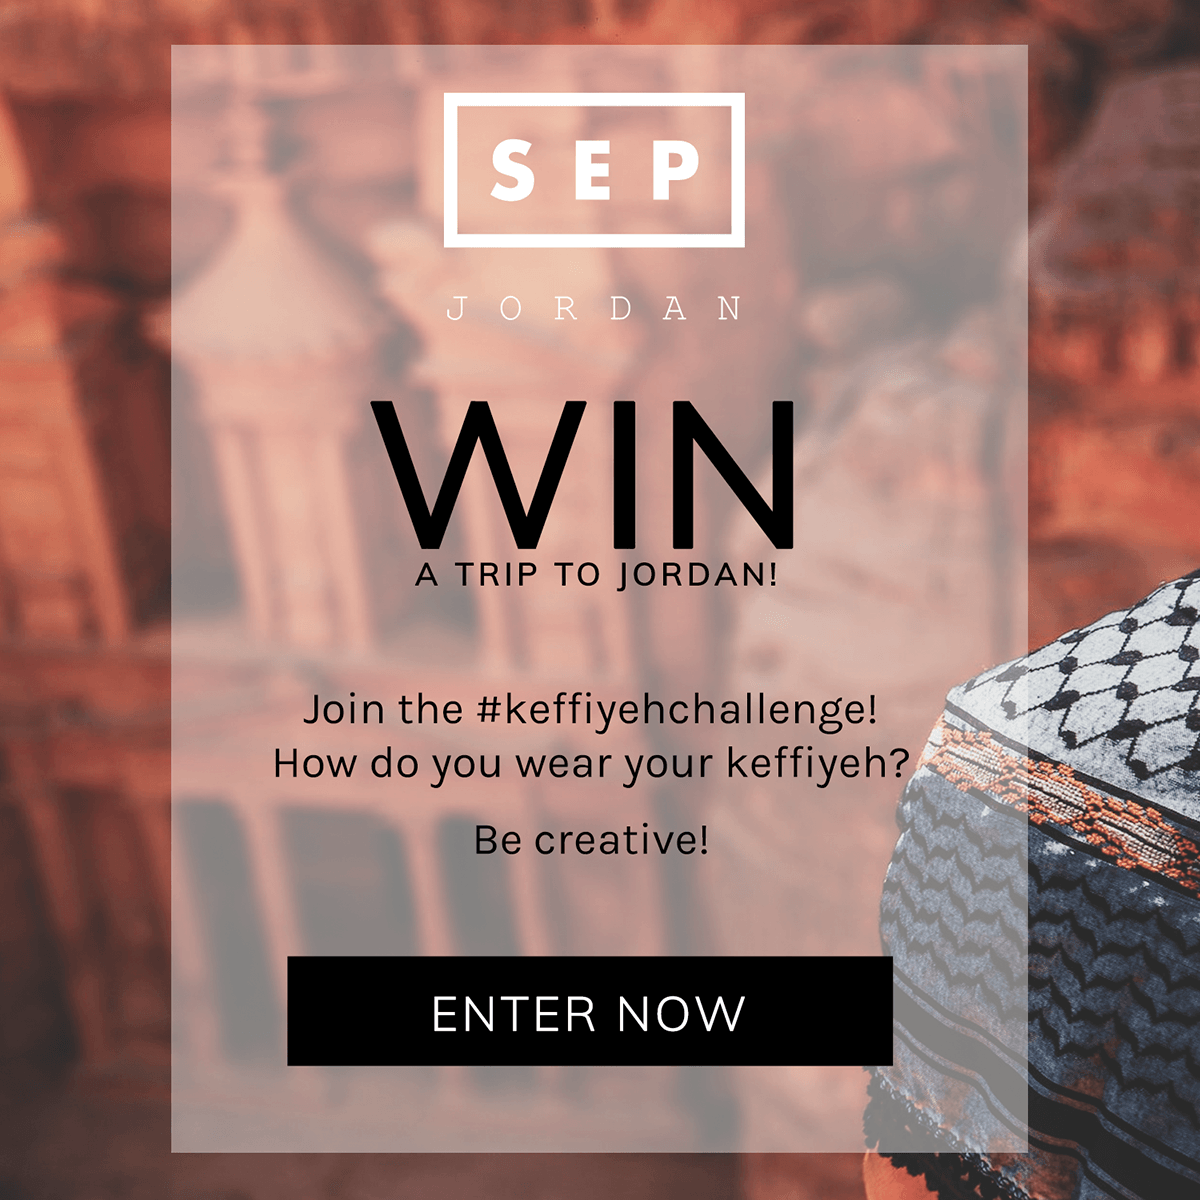 Join the #KeffiyehChallenge and WIN a trip to Jordan!